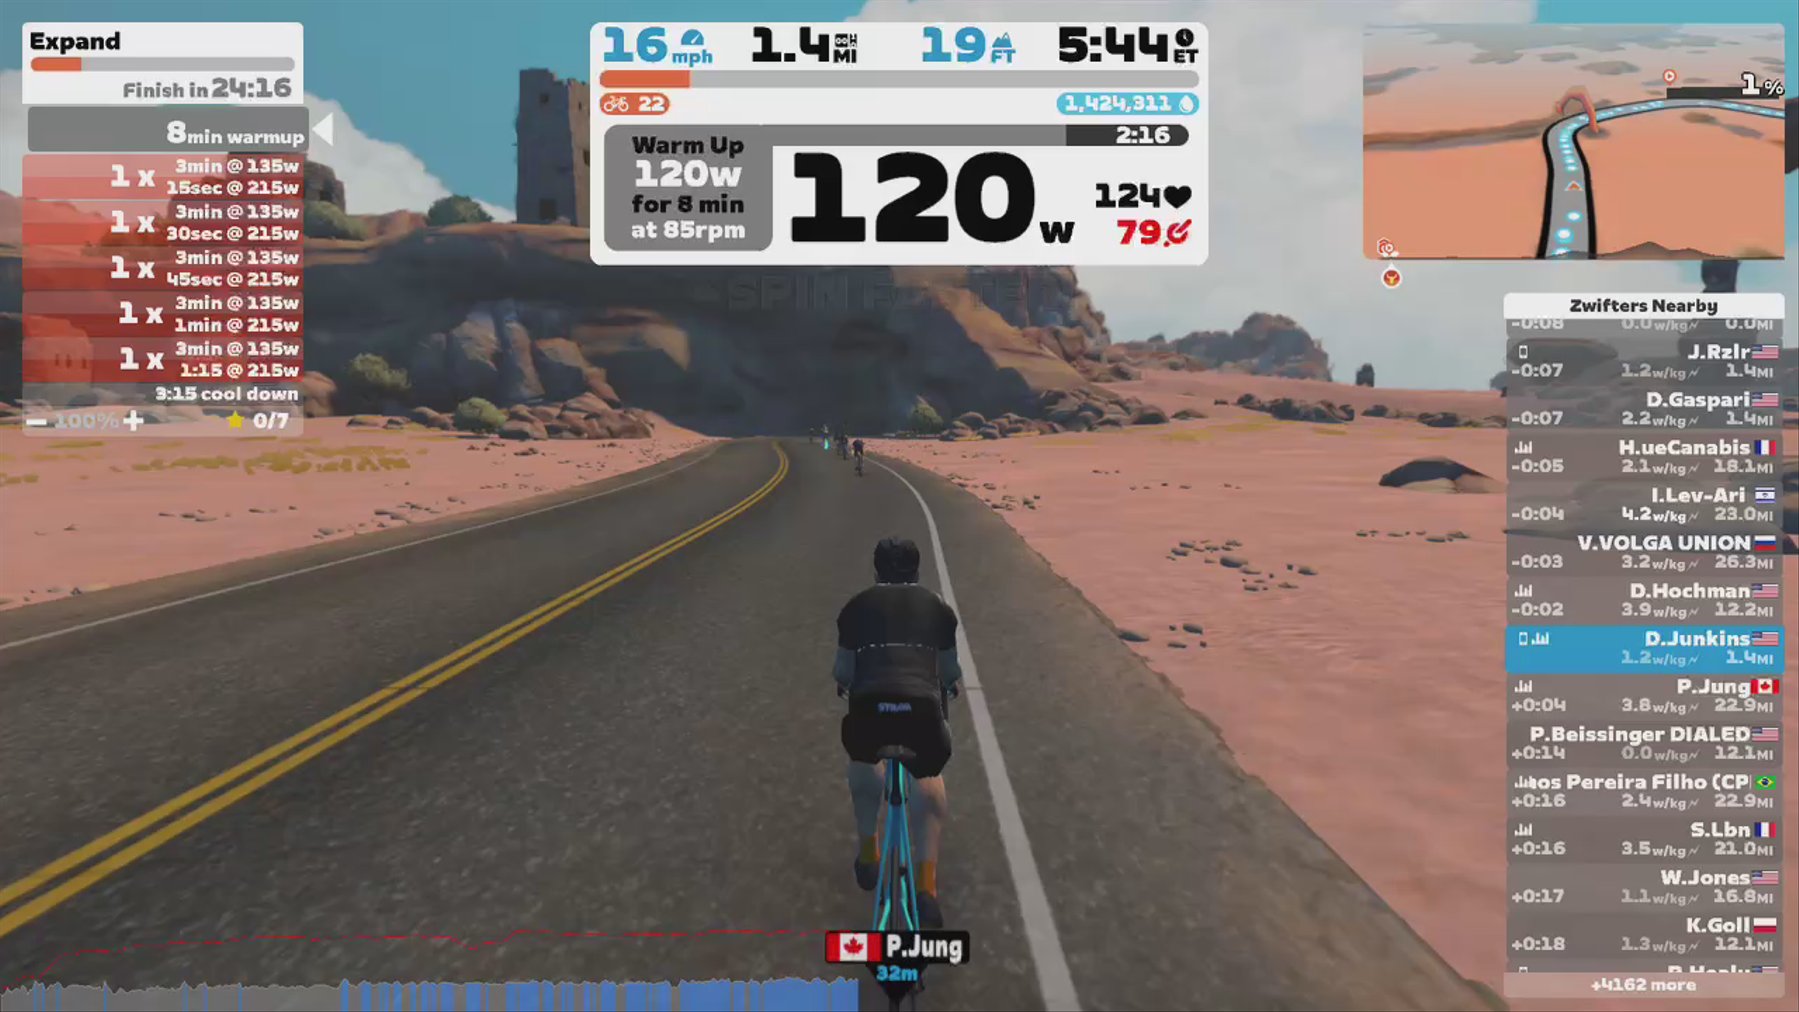 Zwift - Expand in Watopia